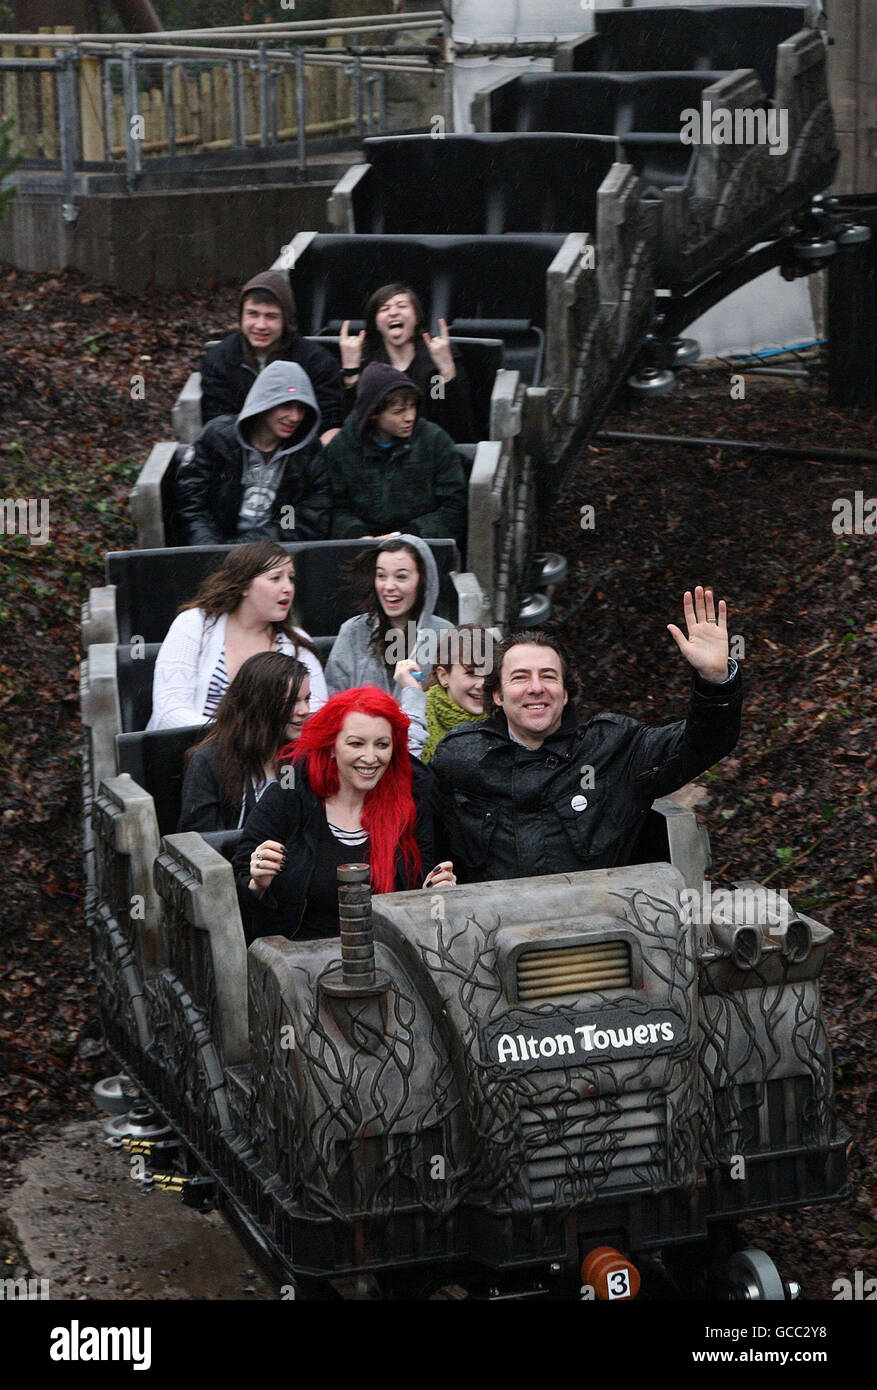 Jonathan Ross and wife Jane Goldman ride the world's first free fall drop rollercoaster, Th13teen, which opened to the public on Saturday March 20, at Alton Towers, Staffordshire. Stock Photo